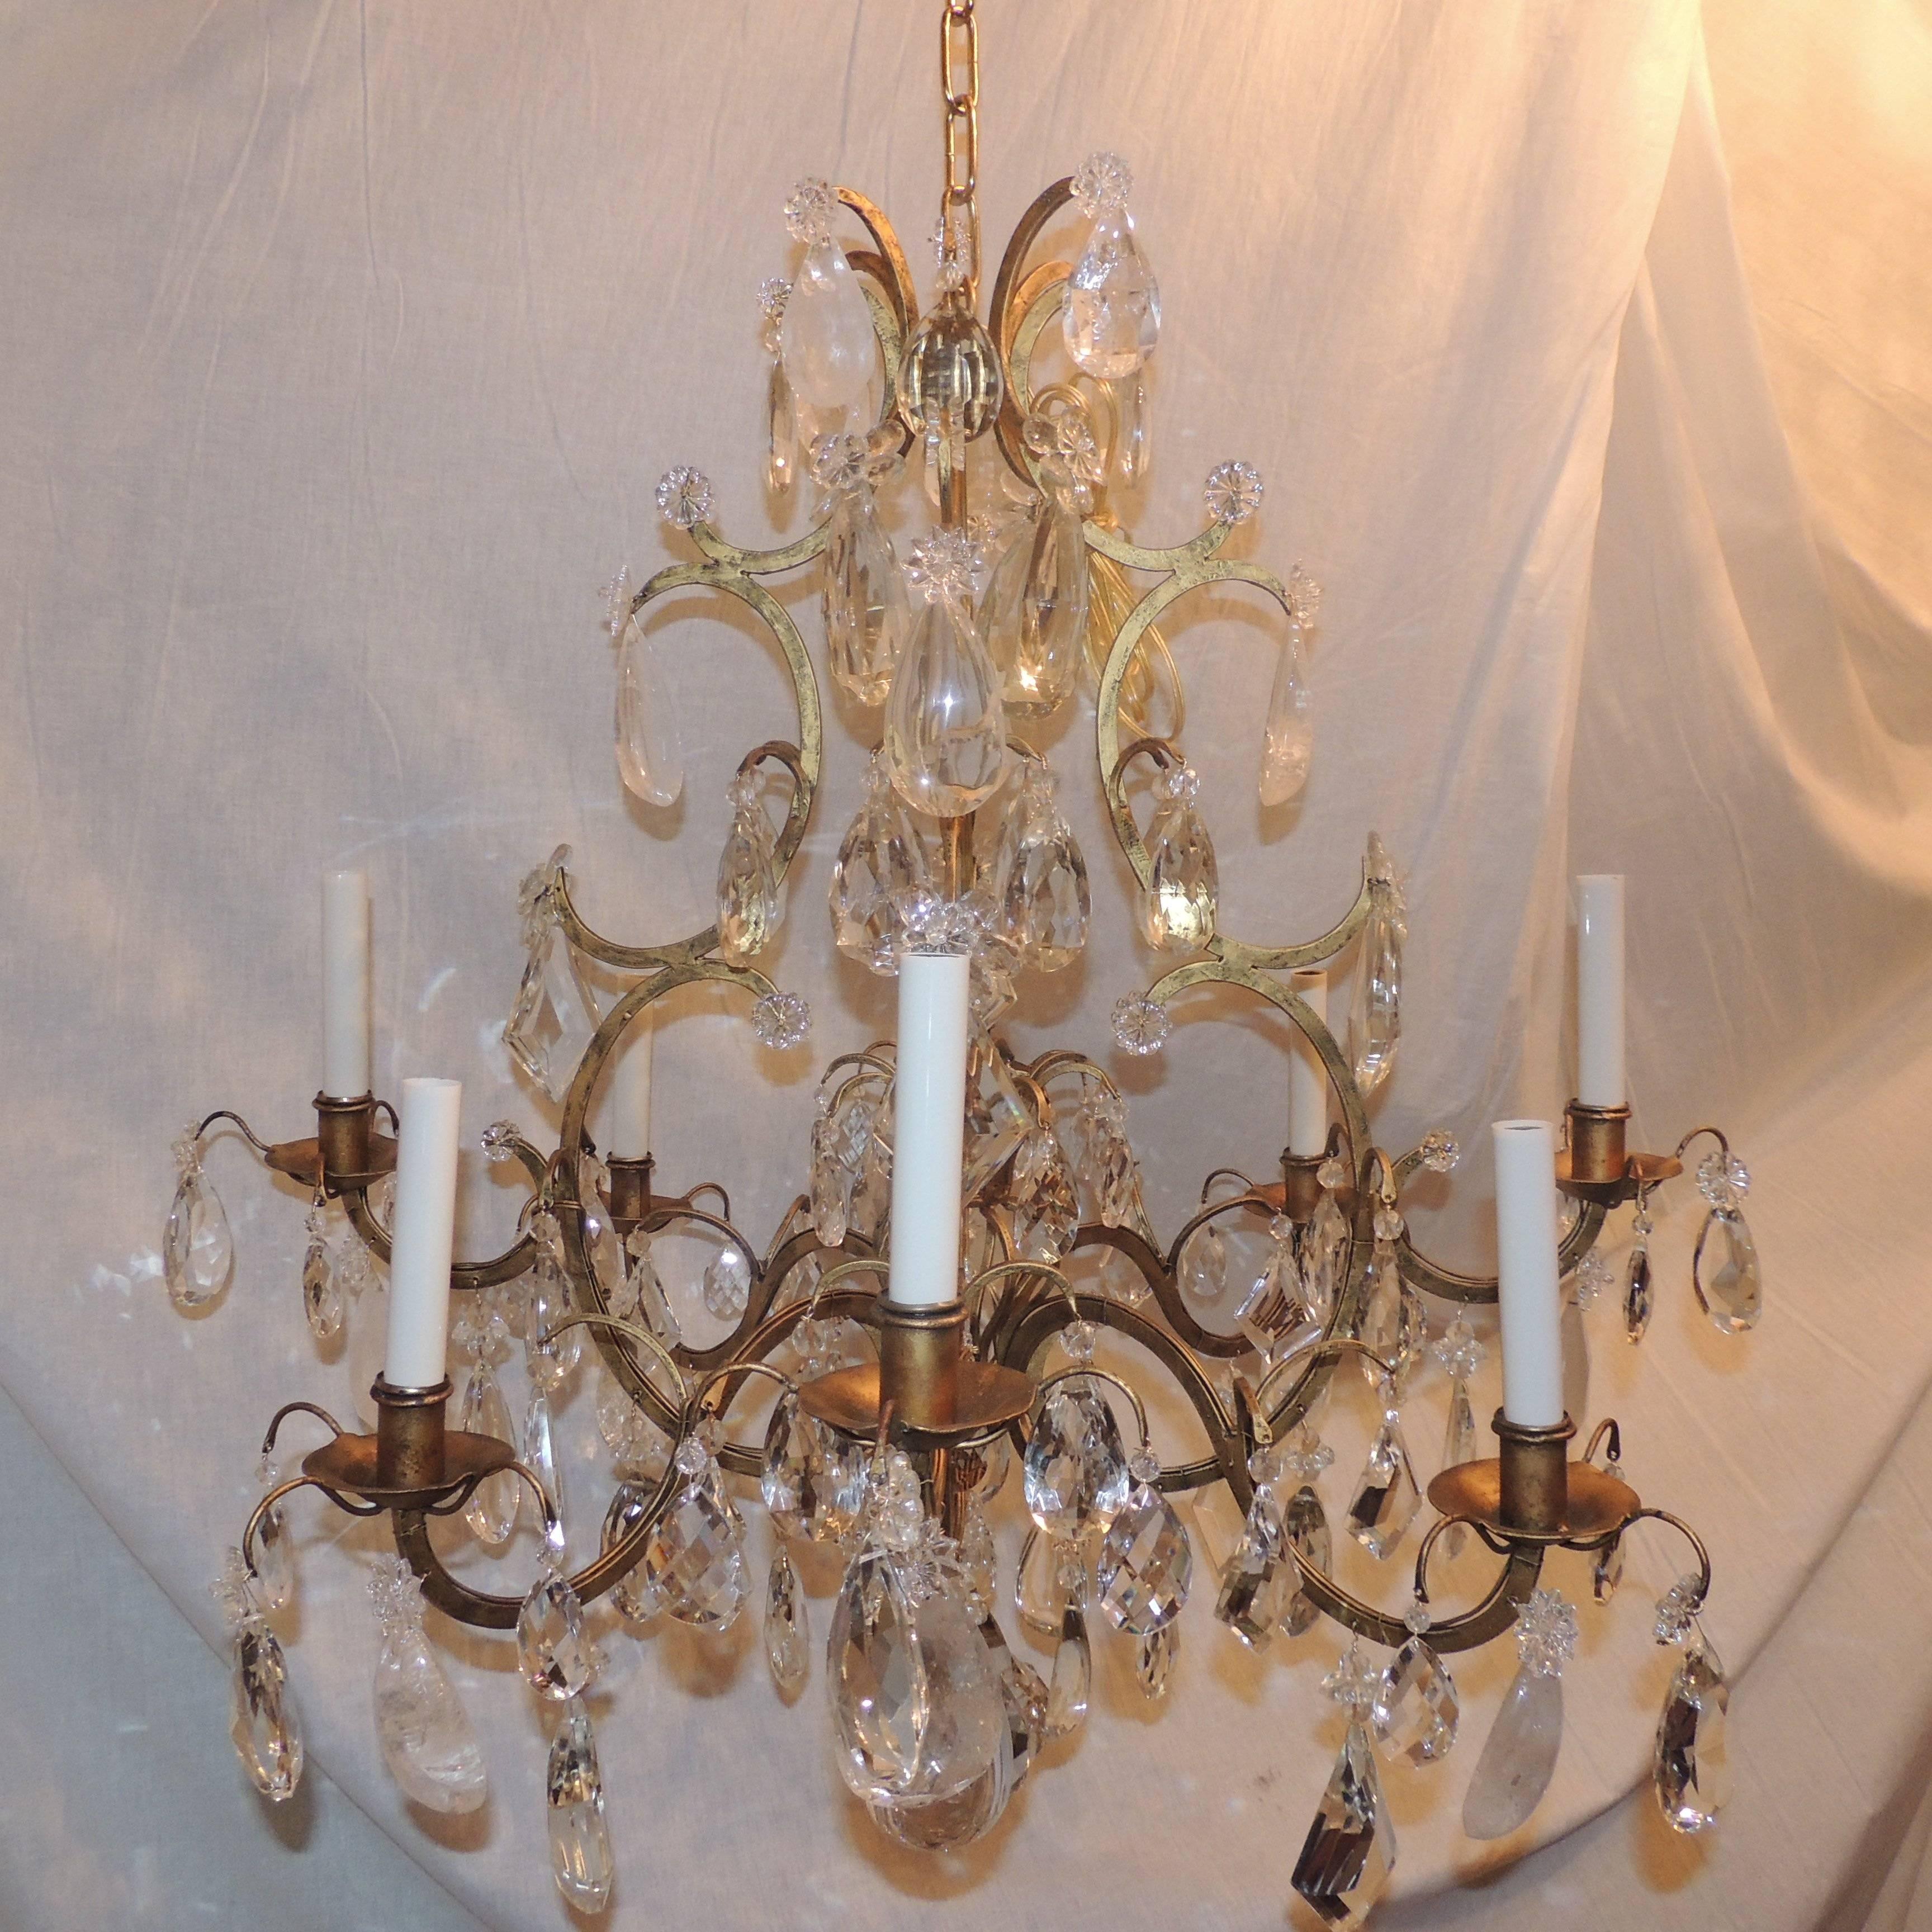 This large Baguès chandelier with eight arms has six layers of beautiful rock crystal and faceted prism drops decorating the sweeping curved doré bronze body.

Measures: 32" H x 32" W.